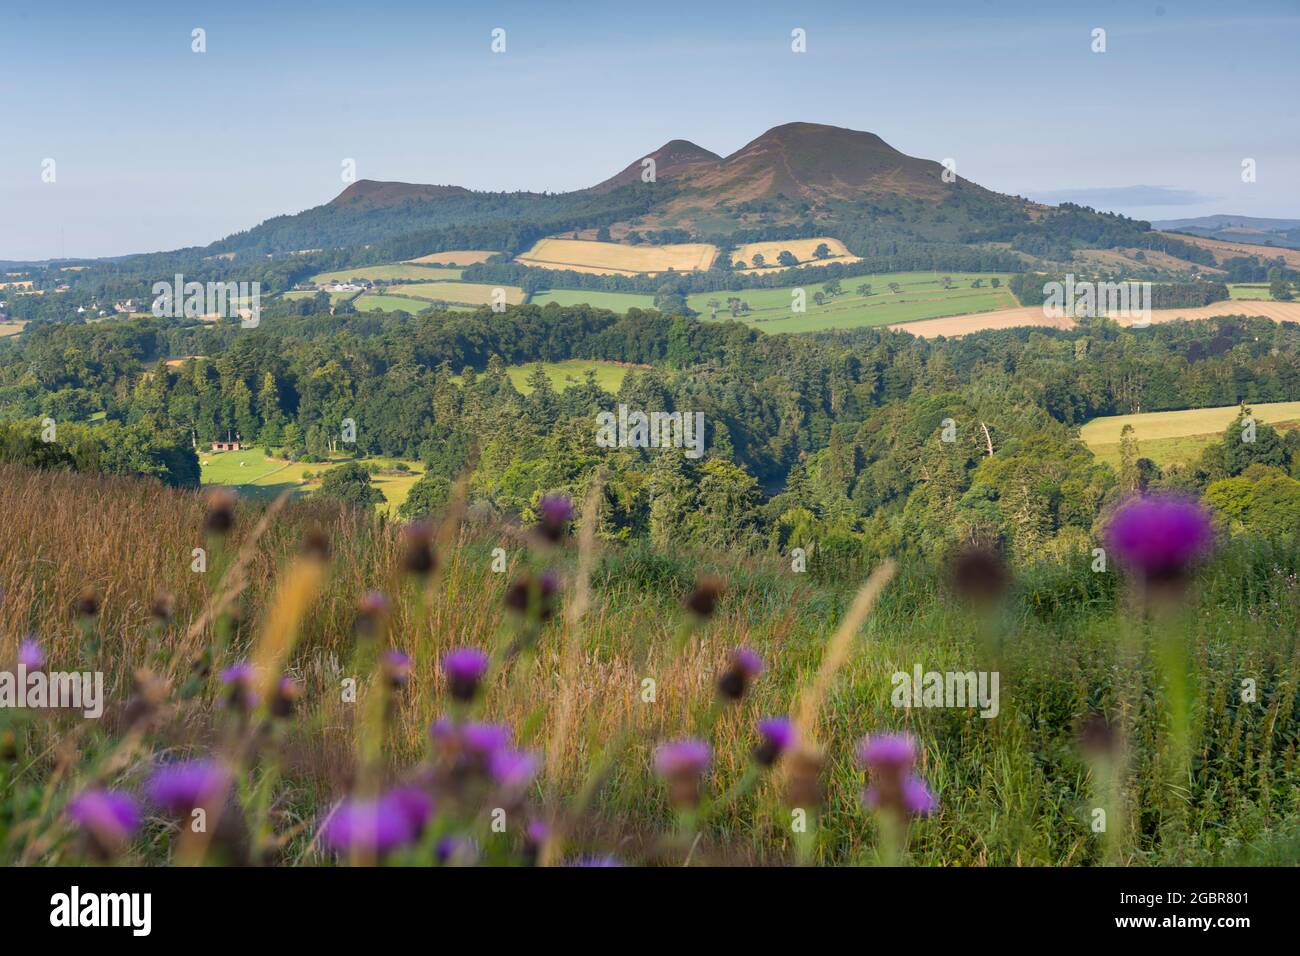 A view of the Eildon Hills from Scott’s View in the Scottish Borders.Scotland, UK  Photo Phil Wilkinson / Alamy Stock Photo